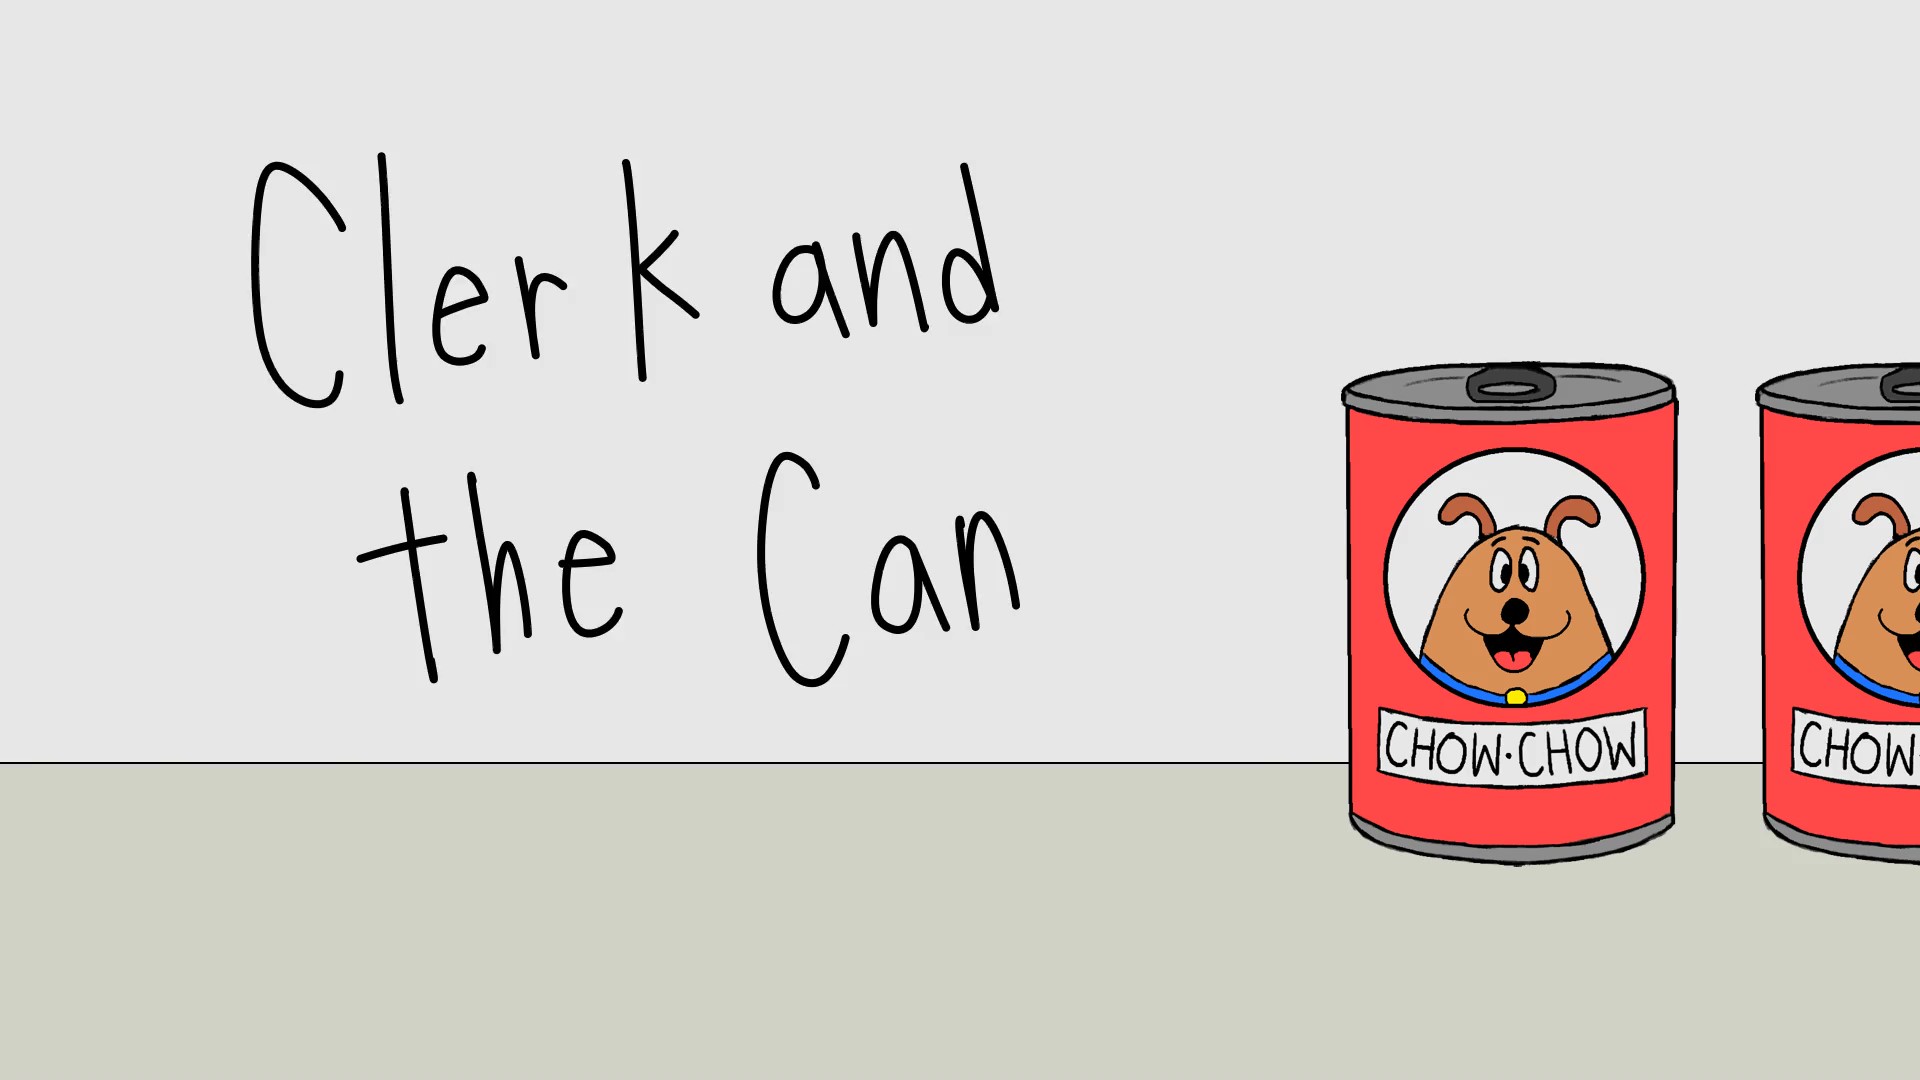 Clerk and the Can